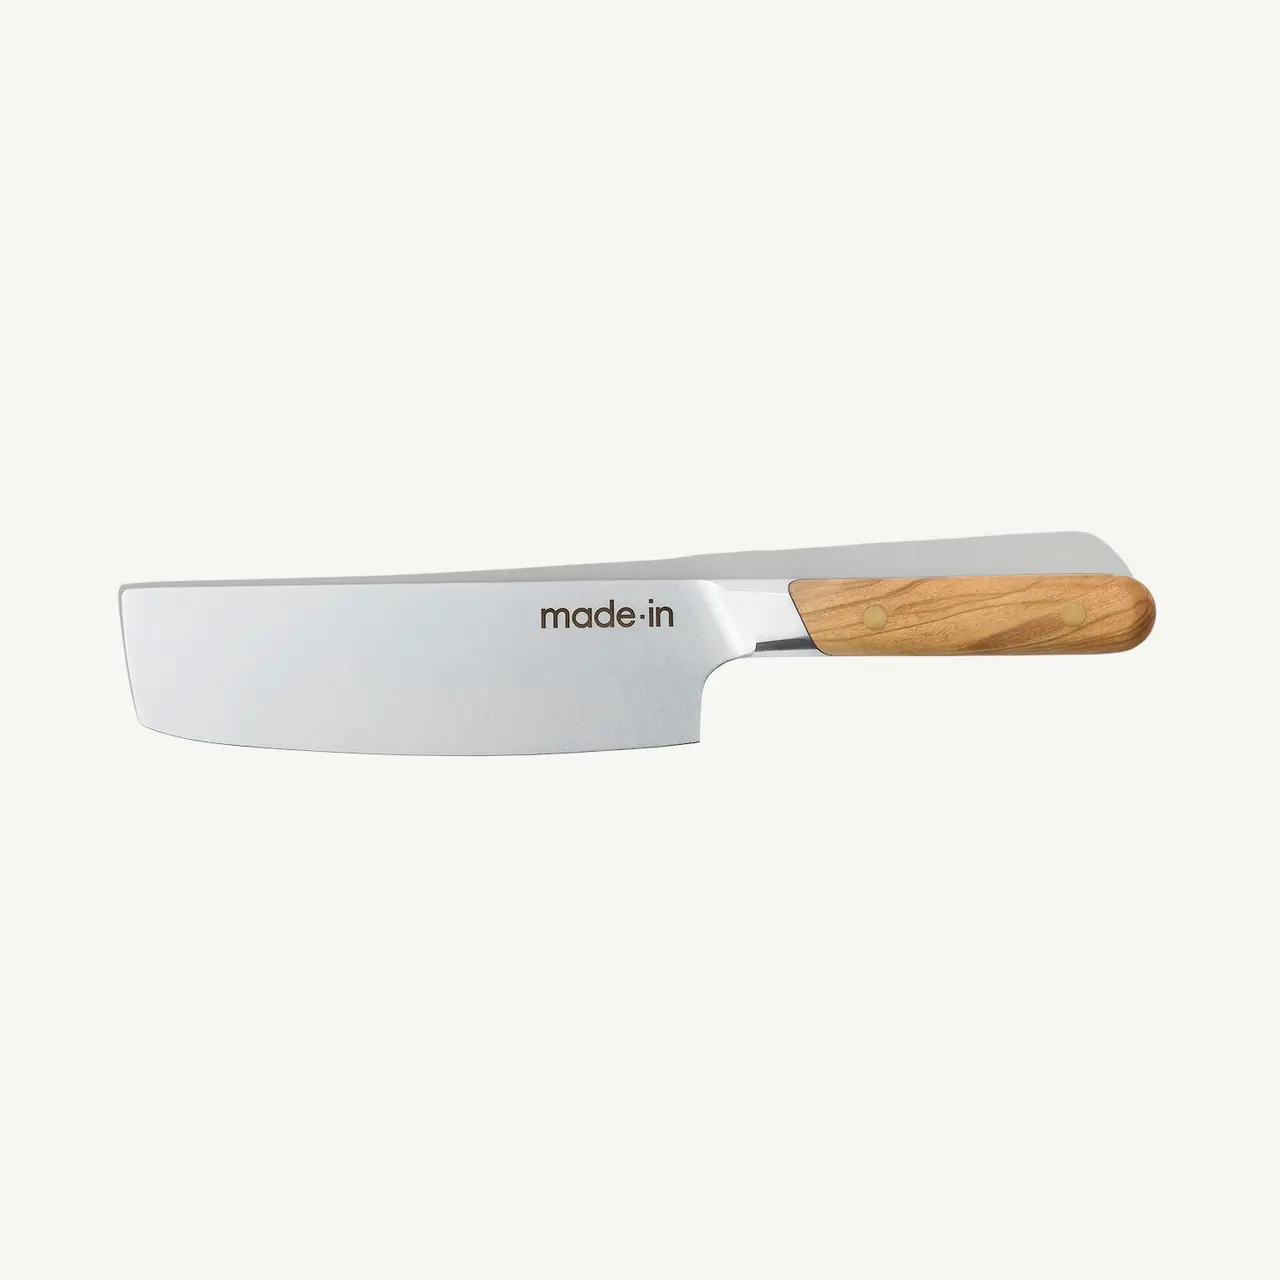 A stainless steel kitchen knife with a wooden handle isolated on a white background.